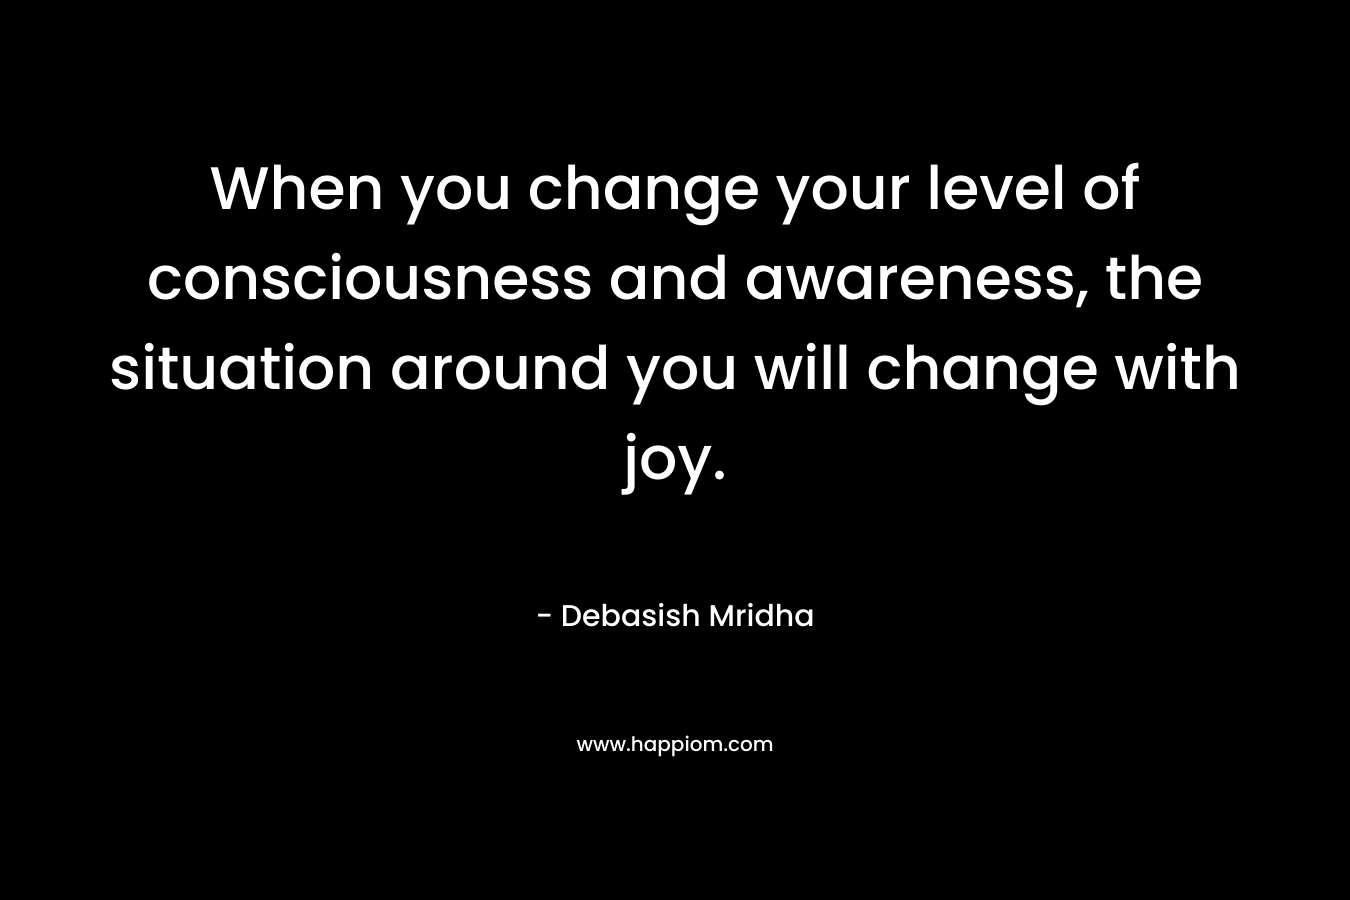 When you change your level of consciousness and awareness, the situation around you will change with joy.